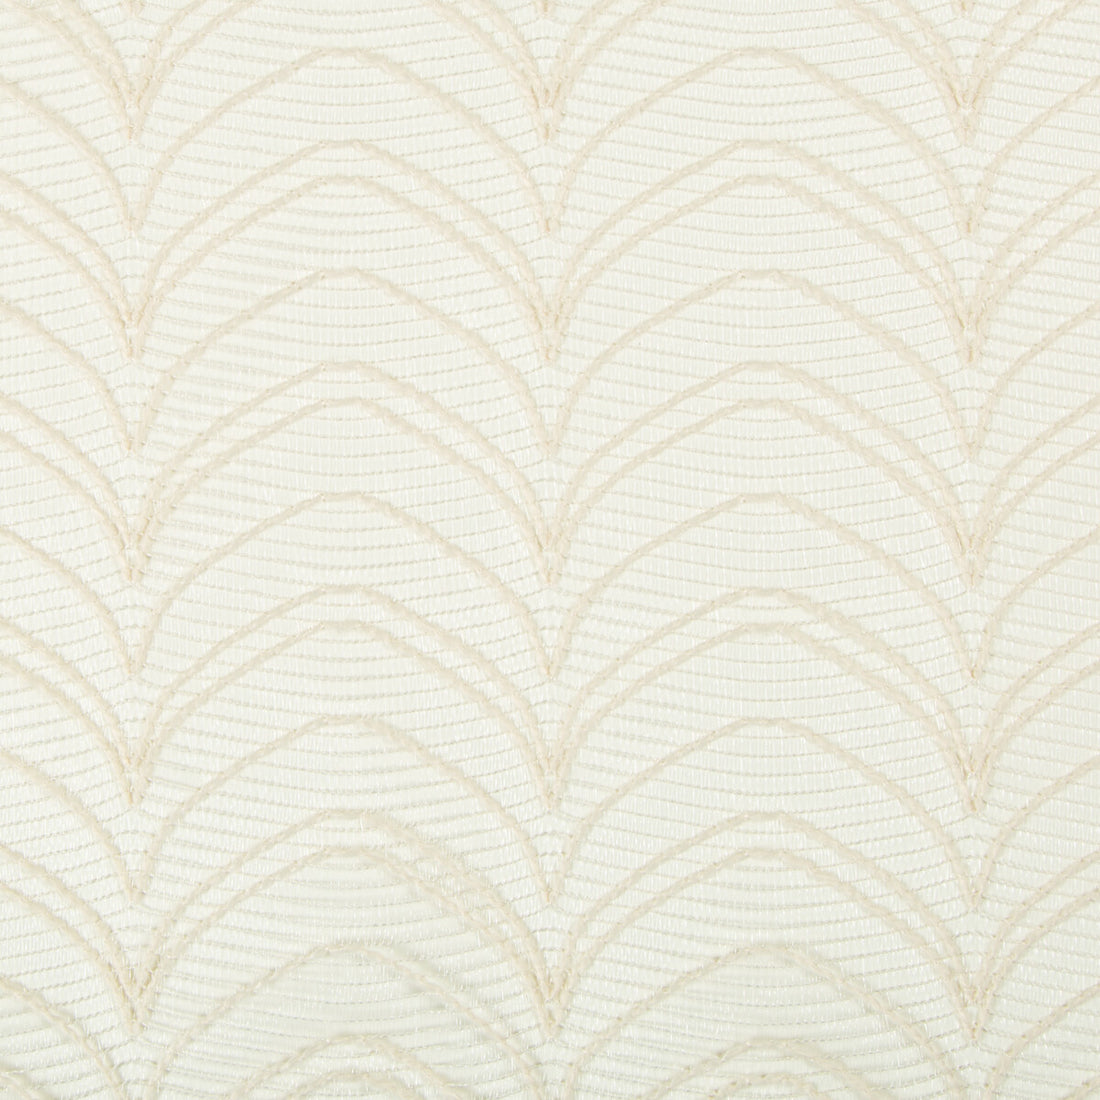 Marlene fabric in ivory color - pattern 4274.16.0 - by Kravet Contract